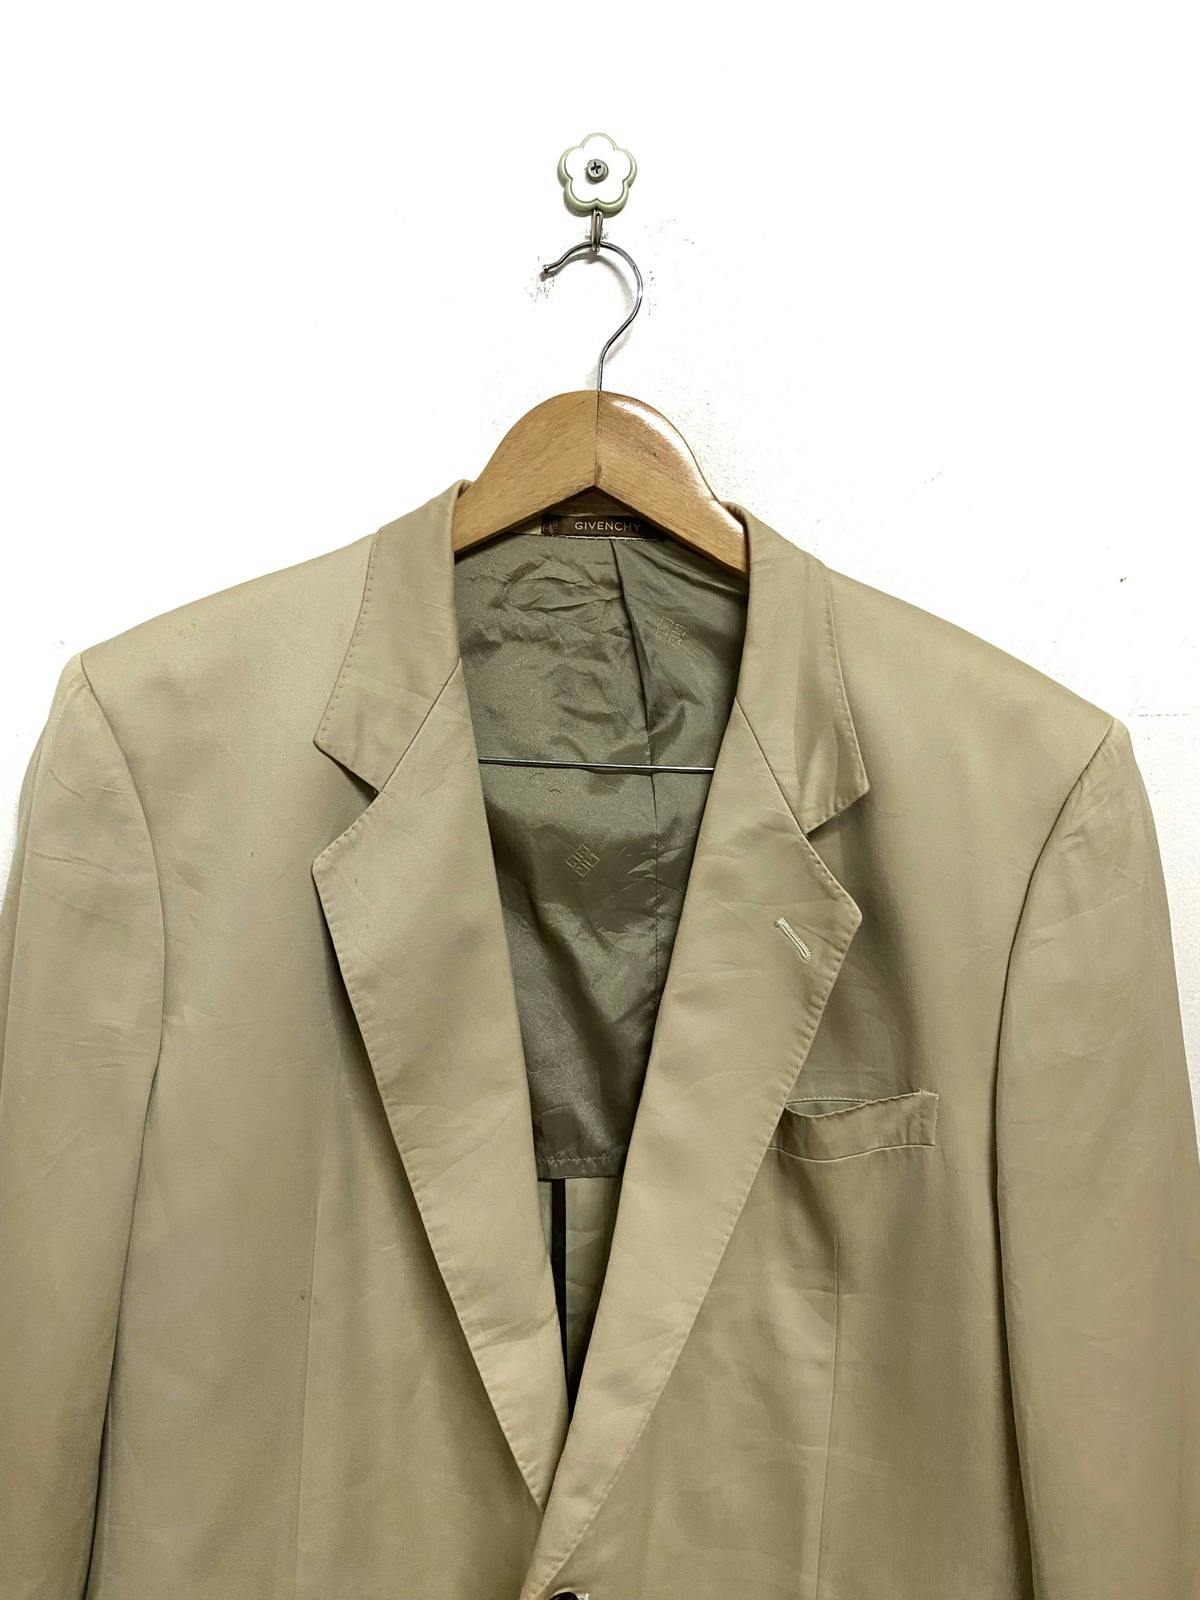 Givenchy Relaxed Jacket Blazer Suit - 3